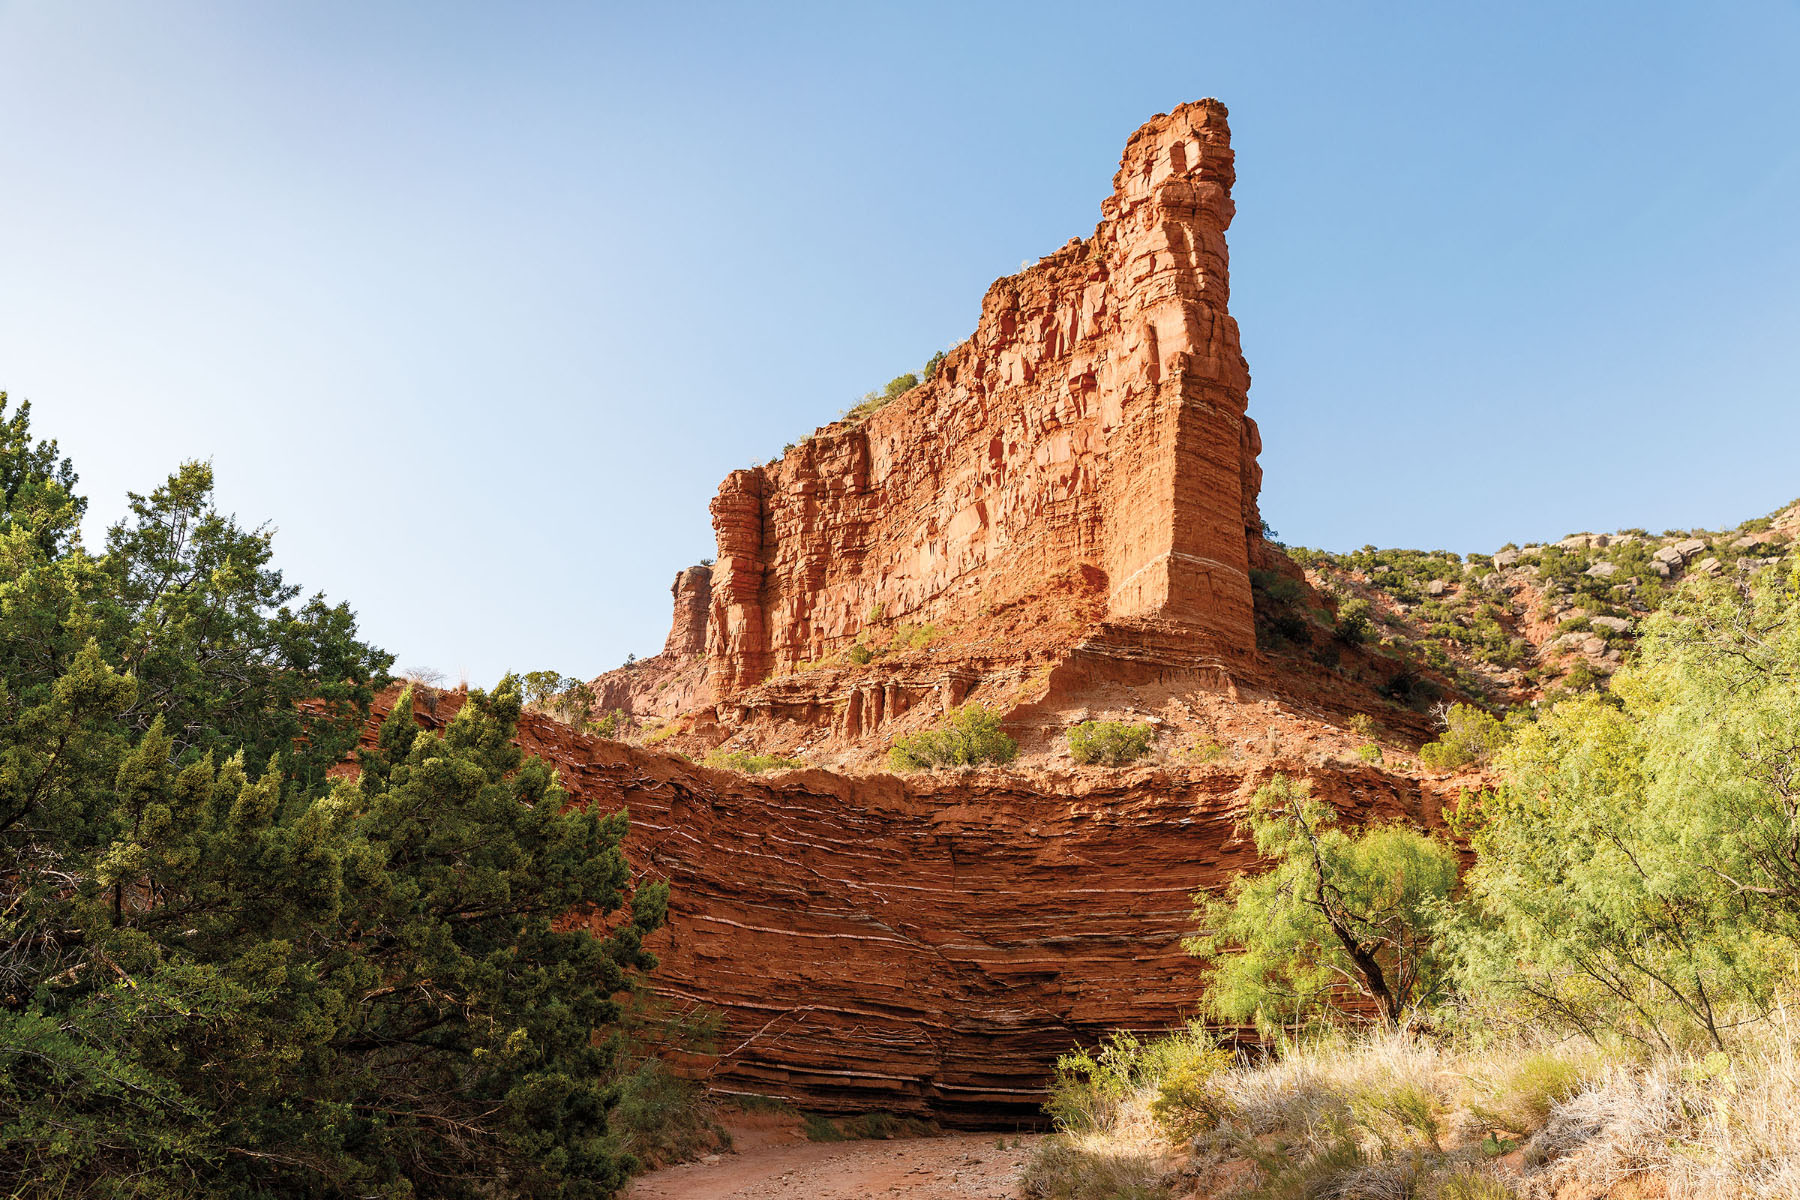 A red rock pillar surrounded by scrubby green trees and sedimentary rock